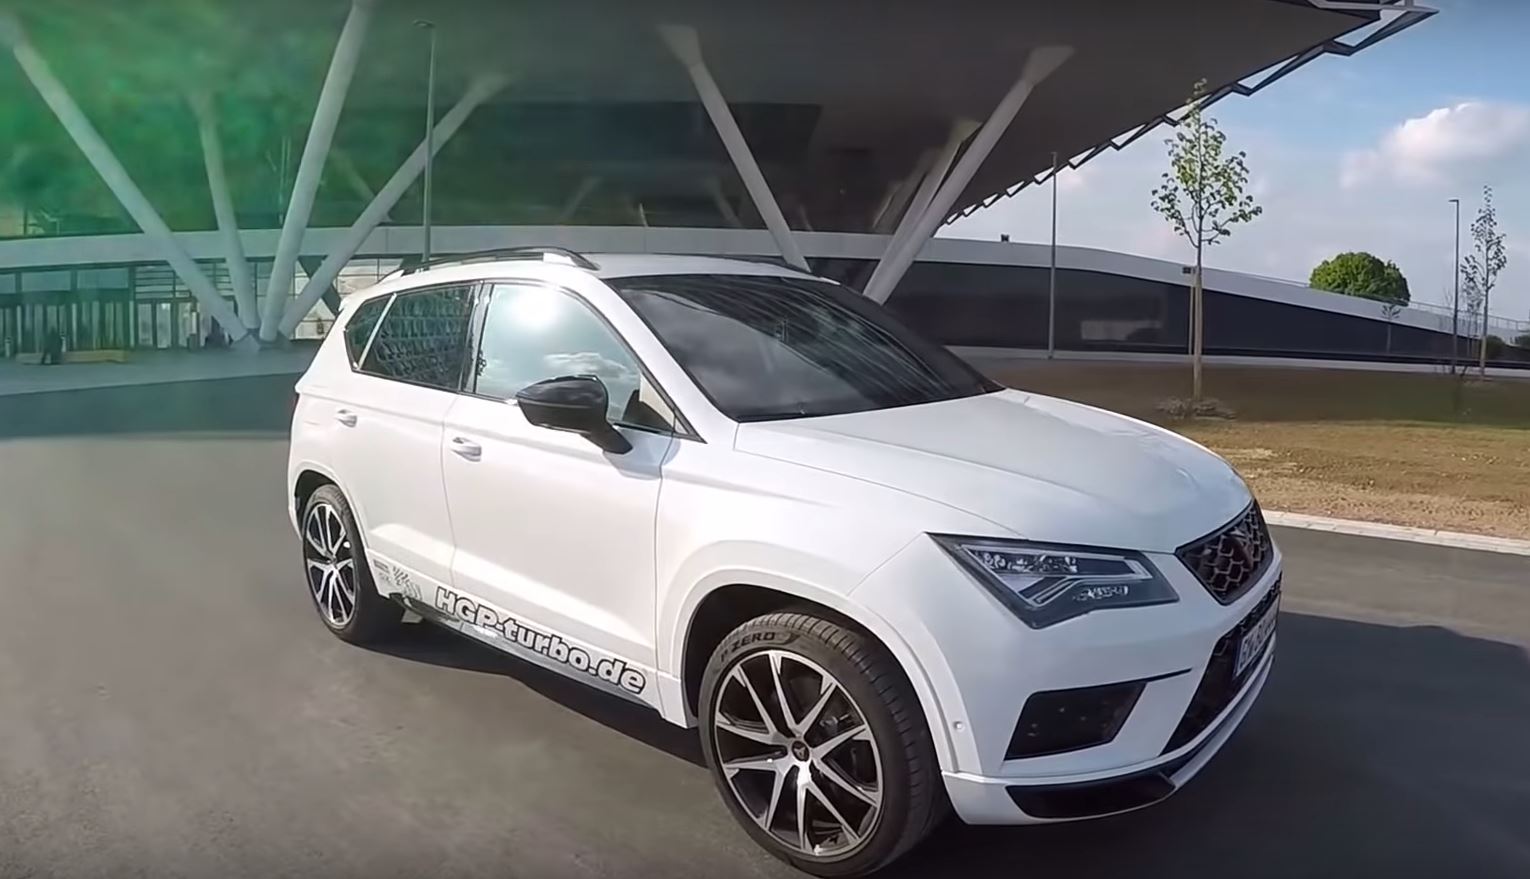 480 HP Cupra Ateca Exists, Does 0 to 100 KM/H in 3.6 Seconds - autoevolution